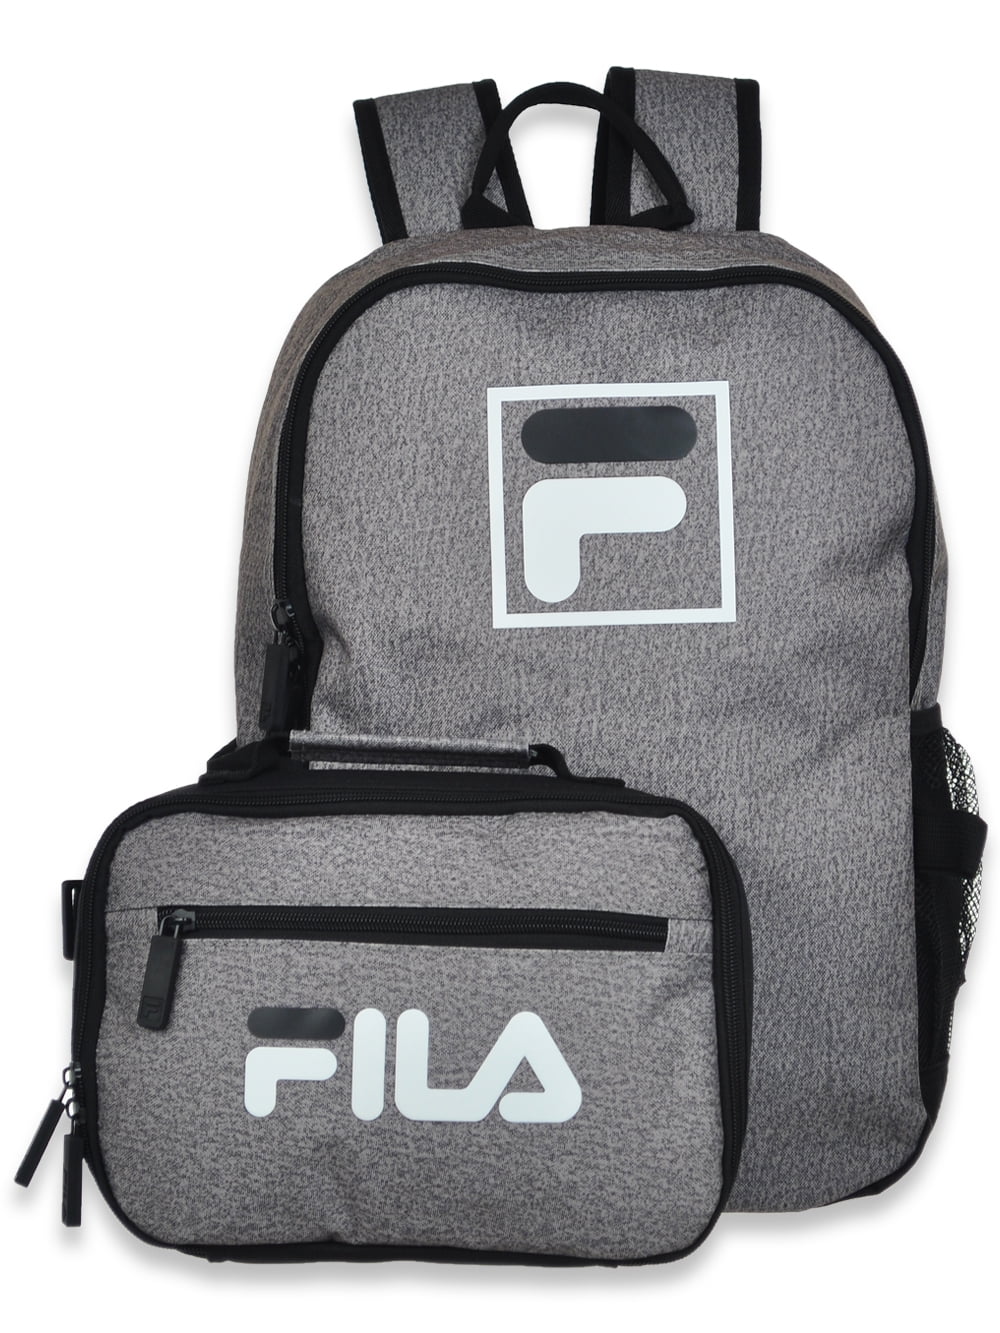 FILA Hailee 2 Piece Mini Backpack with Pouch NWT